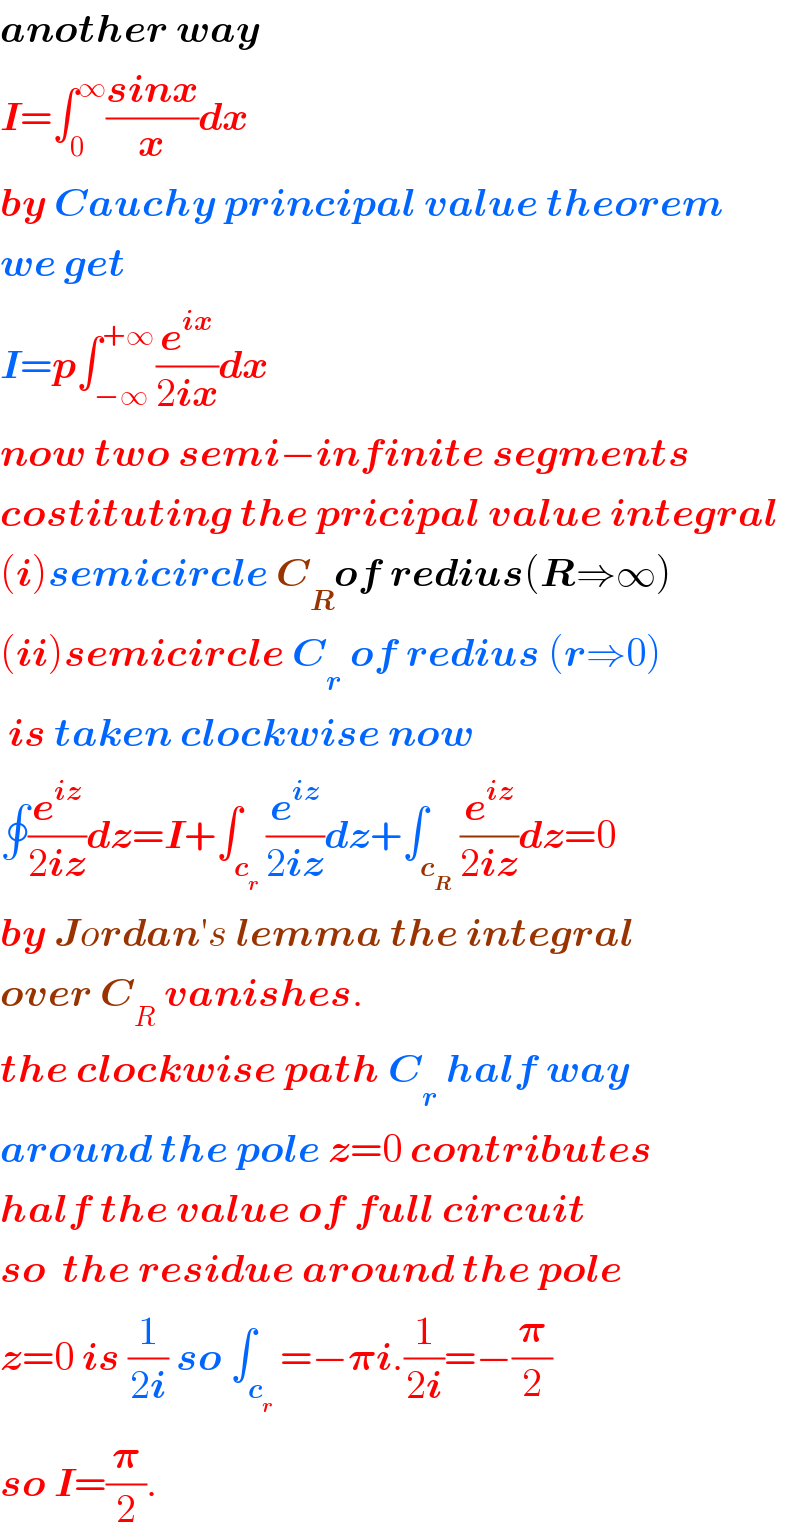 another way  I=∫_0 ^∞ ((sinx)/x)dx  by Cauchy principal value theorem  we get  I=p∫_(−∞) ^(+∞) (e^(ix) /(2ix))dx  now two semi−infinite segments  costituting the pricipal value integral  (i)semicircle C_R of redius(R⇒∞)  (ii)semicircle C_r  of redius (r⇒0)   is taken clockwise now  ∮(e^(iz) /(2iz))dz=I+∫_c_r  (e^(iz) /(2iz))dz+∫_c_R  (e^(iz) /(2iz))dz=0  by Jordan′s lemma the integral  over C_R  vanishes.  the clockwise path C_r  half way  around the pole z=0 contributes  half the value of full circuit  so  the residue around the pole  z=0 is (1/(2i)) so ∫_c_r  =−𝛑i.(1/(2i))=−(𝛑/2)   so I=(𝛑/2).  